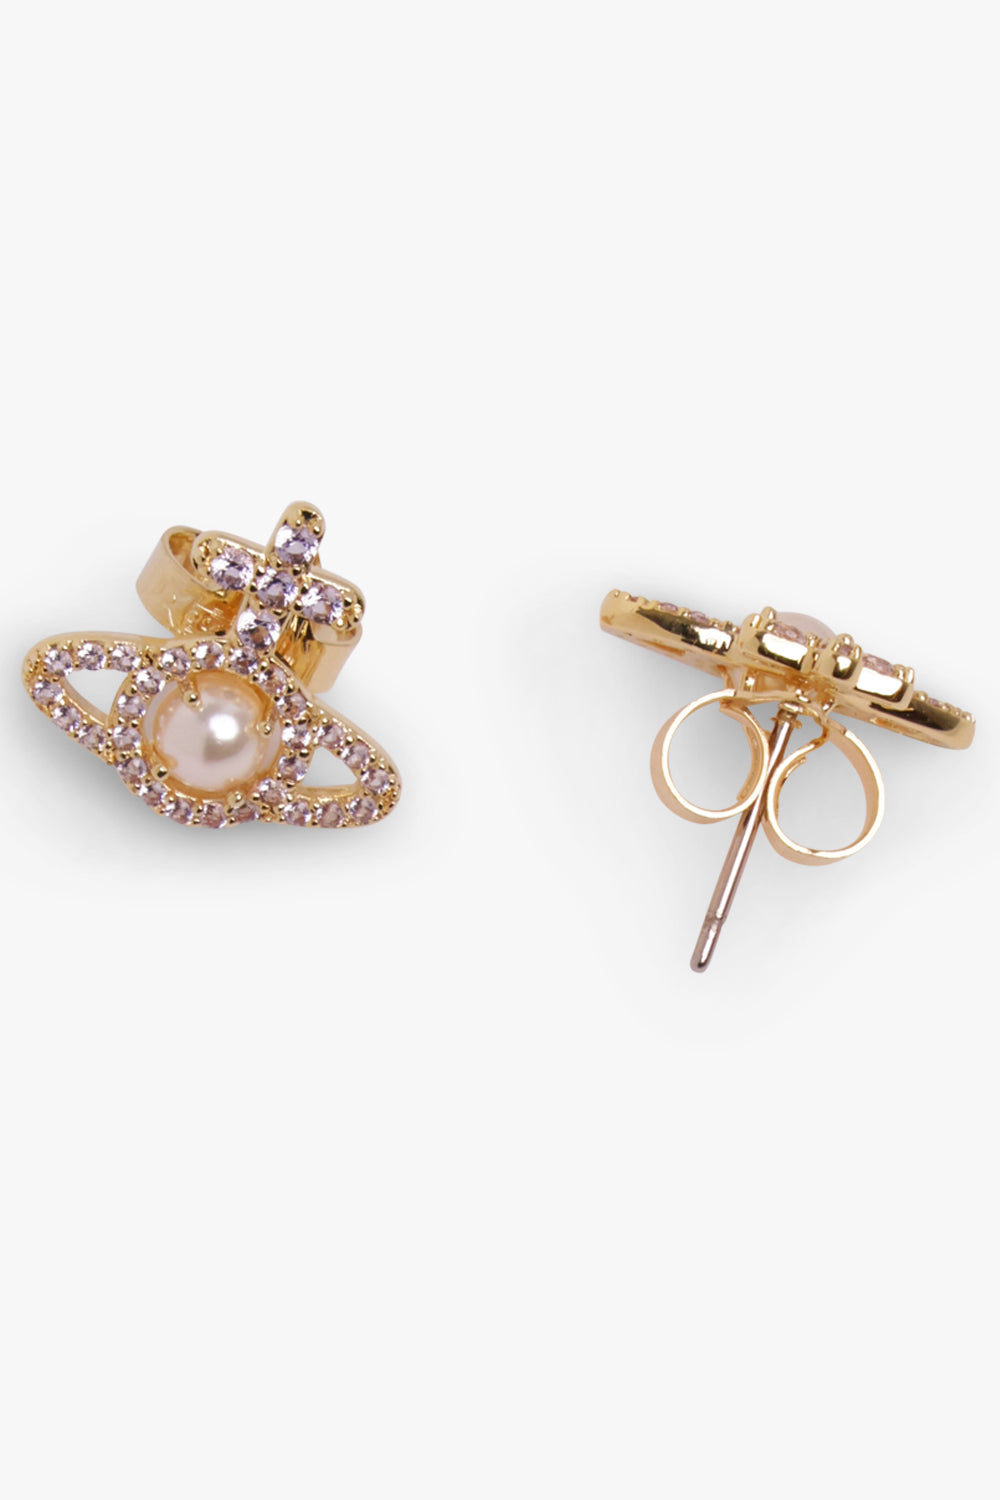 VIVIENNE WESTWOOD JEWELLRY GOLD / GOLD OLYMPIA PEARL EARRINGS | CREAM ROSE PEARL/GOLD